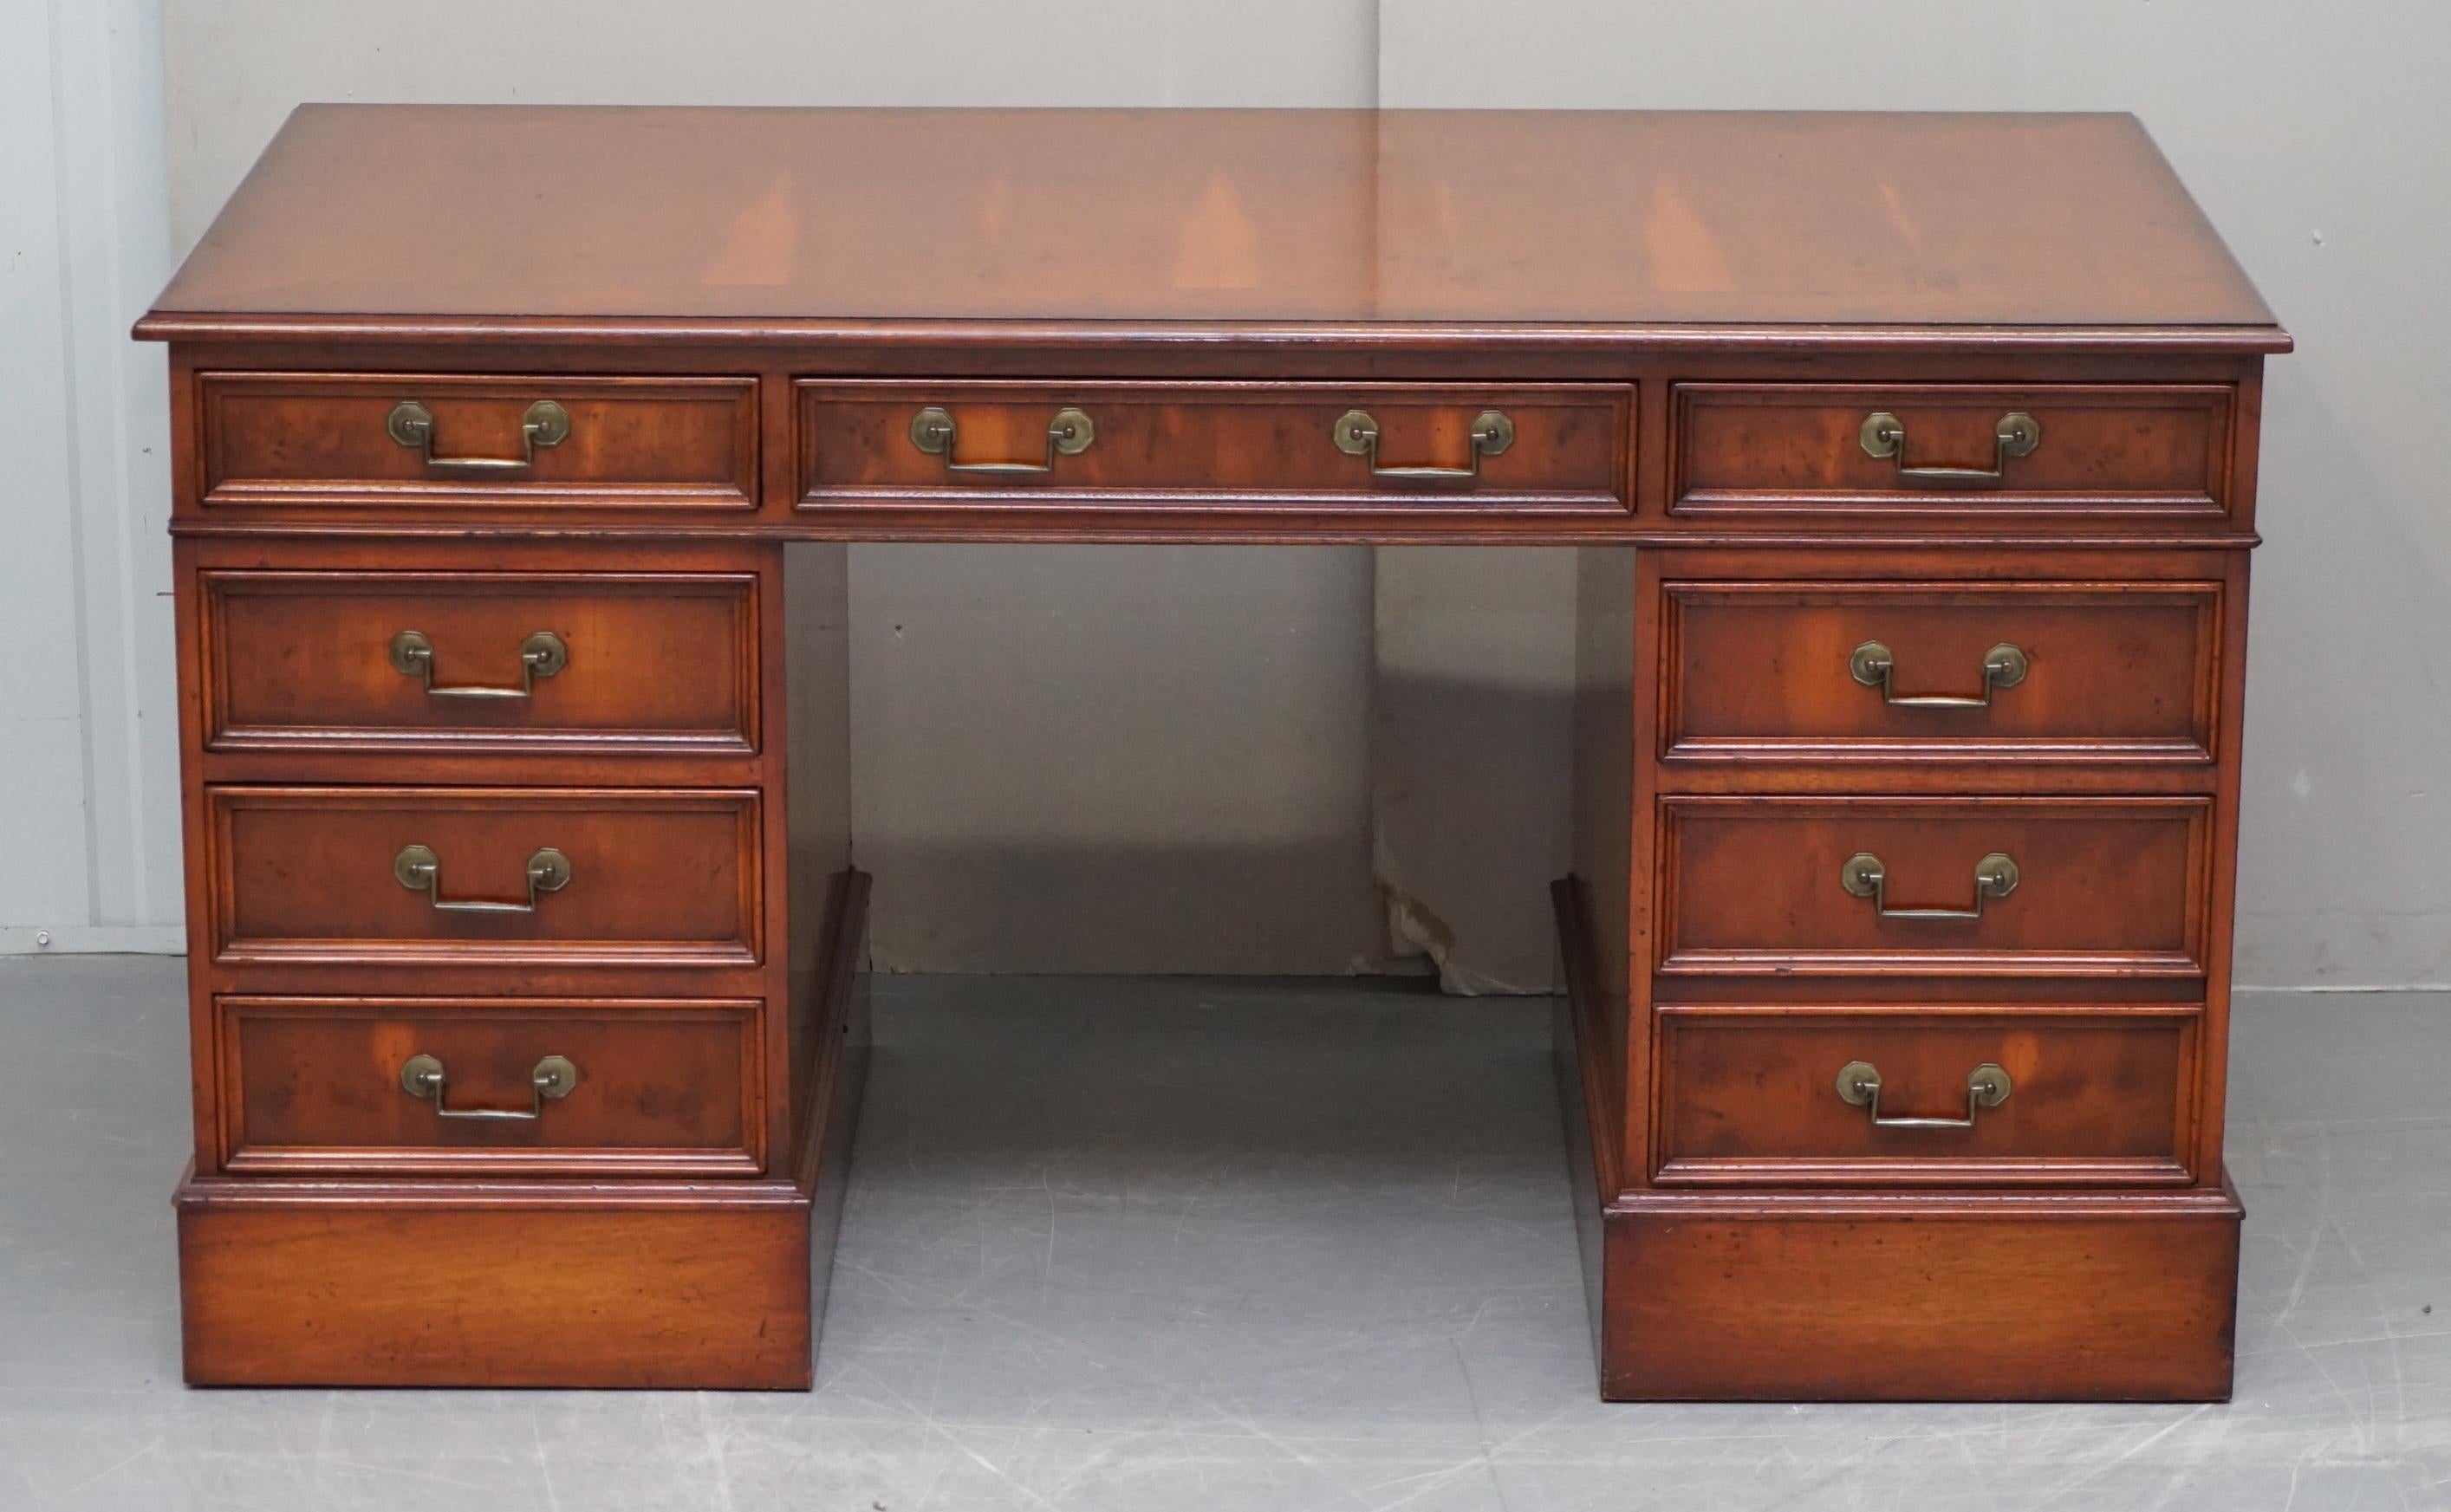 We are delighted to offer for sale this lovely vintage Burr Yew wood twin pedestal partner desk with natural wood top

A very good looking, nicely proportioned desk, I don't come across many that have the all wood top, its a nice break from the